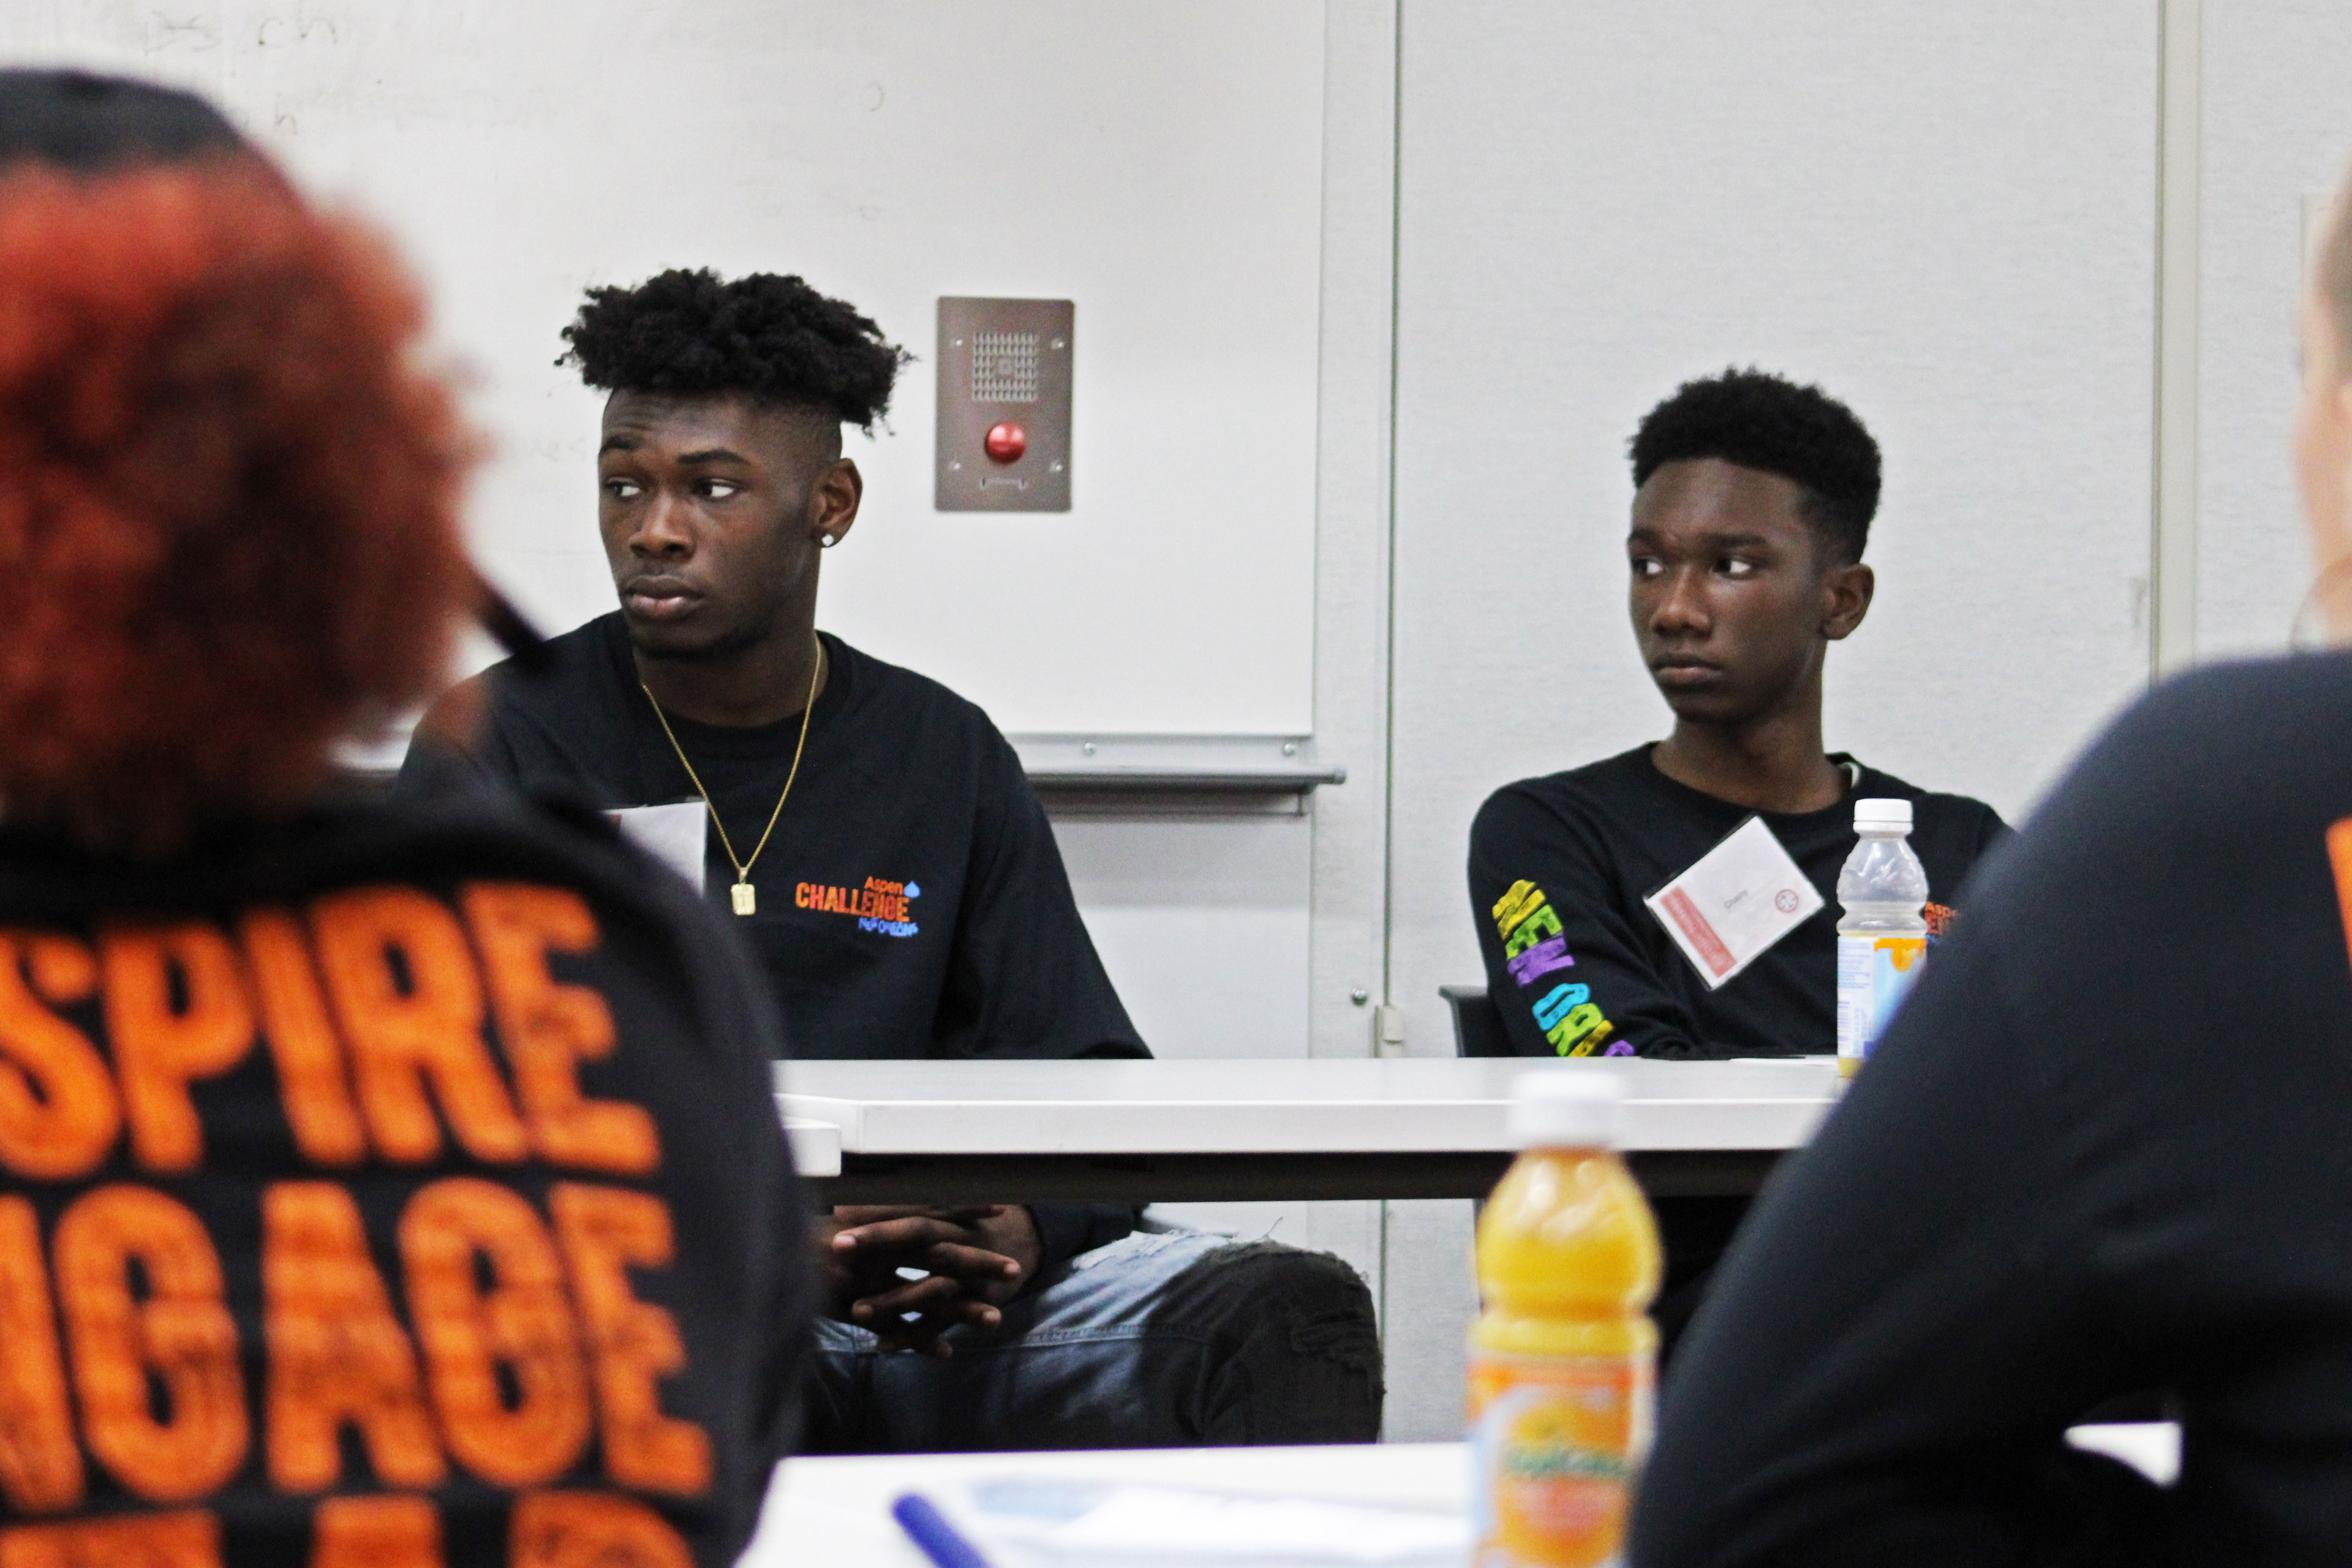 A photo of two Black high schoolers sitting at a table listening to someone speak.